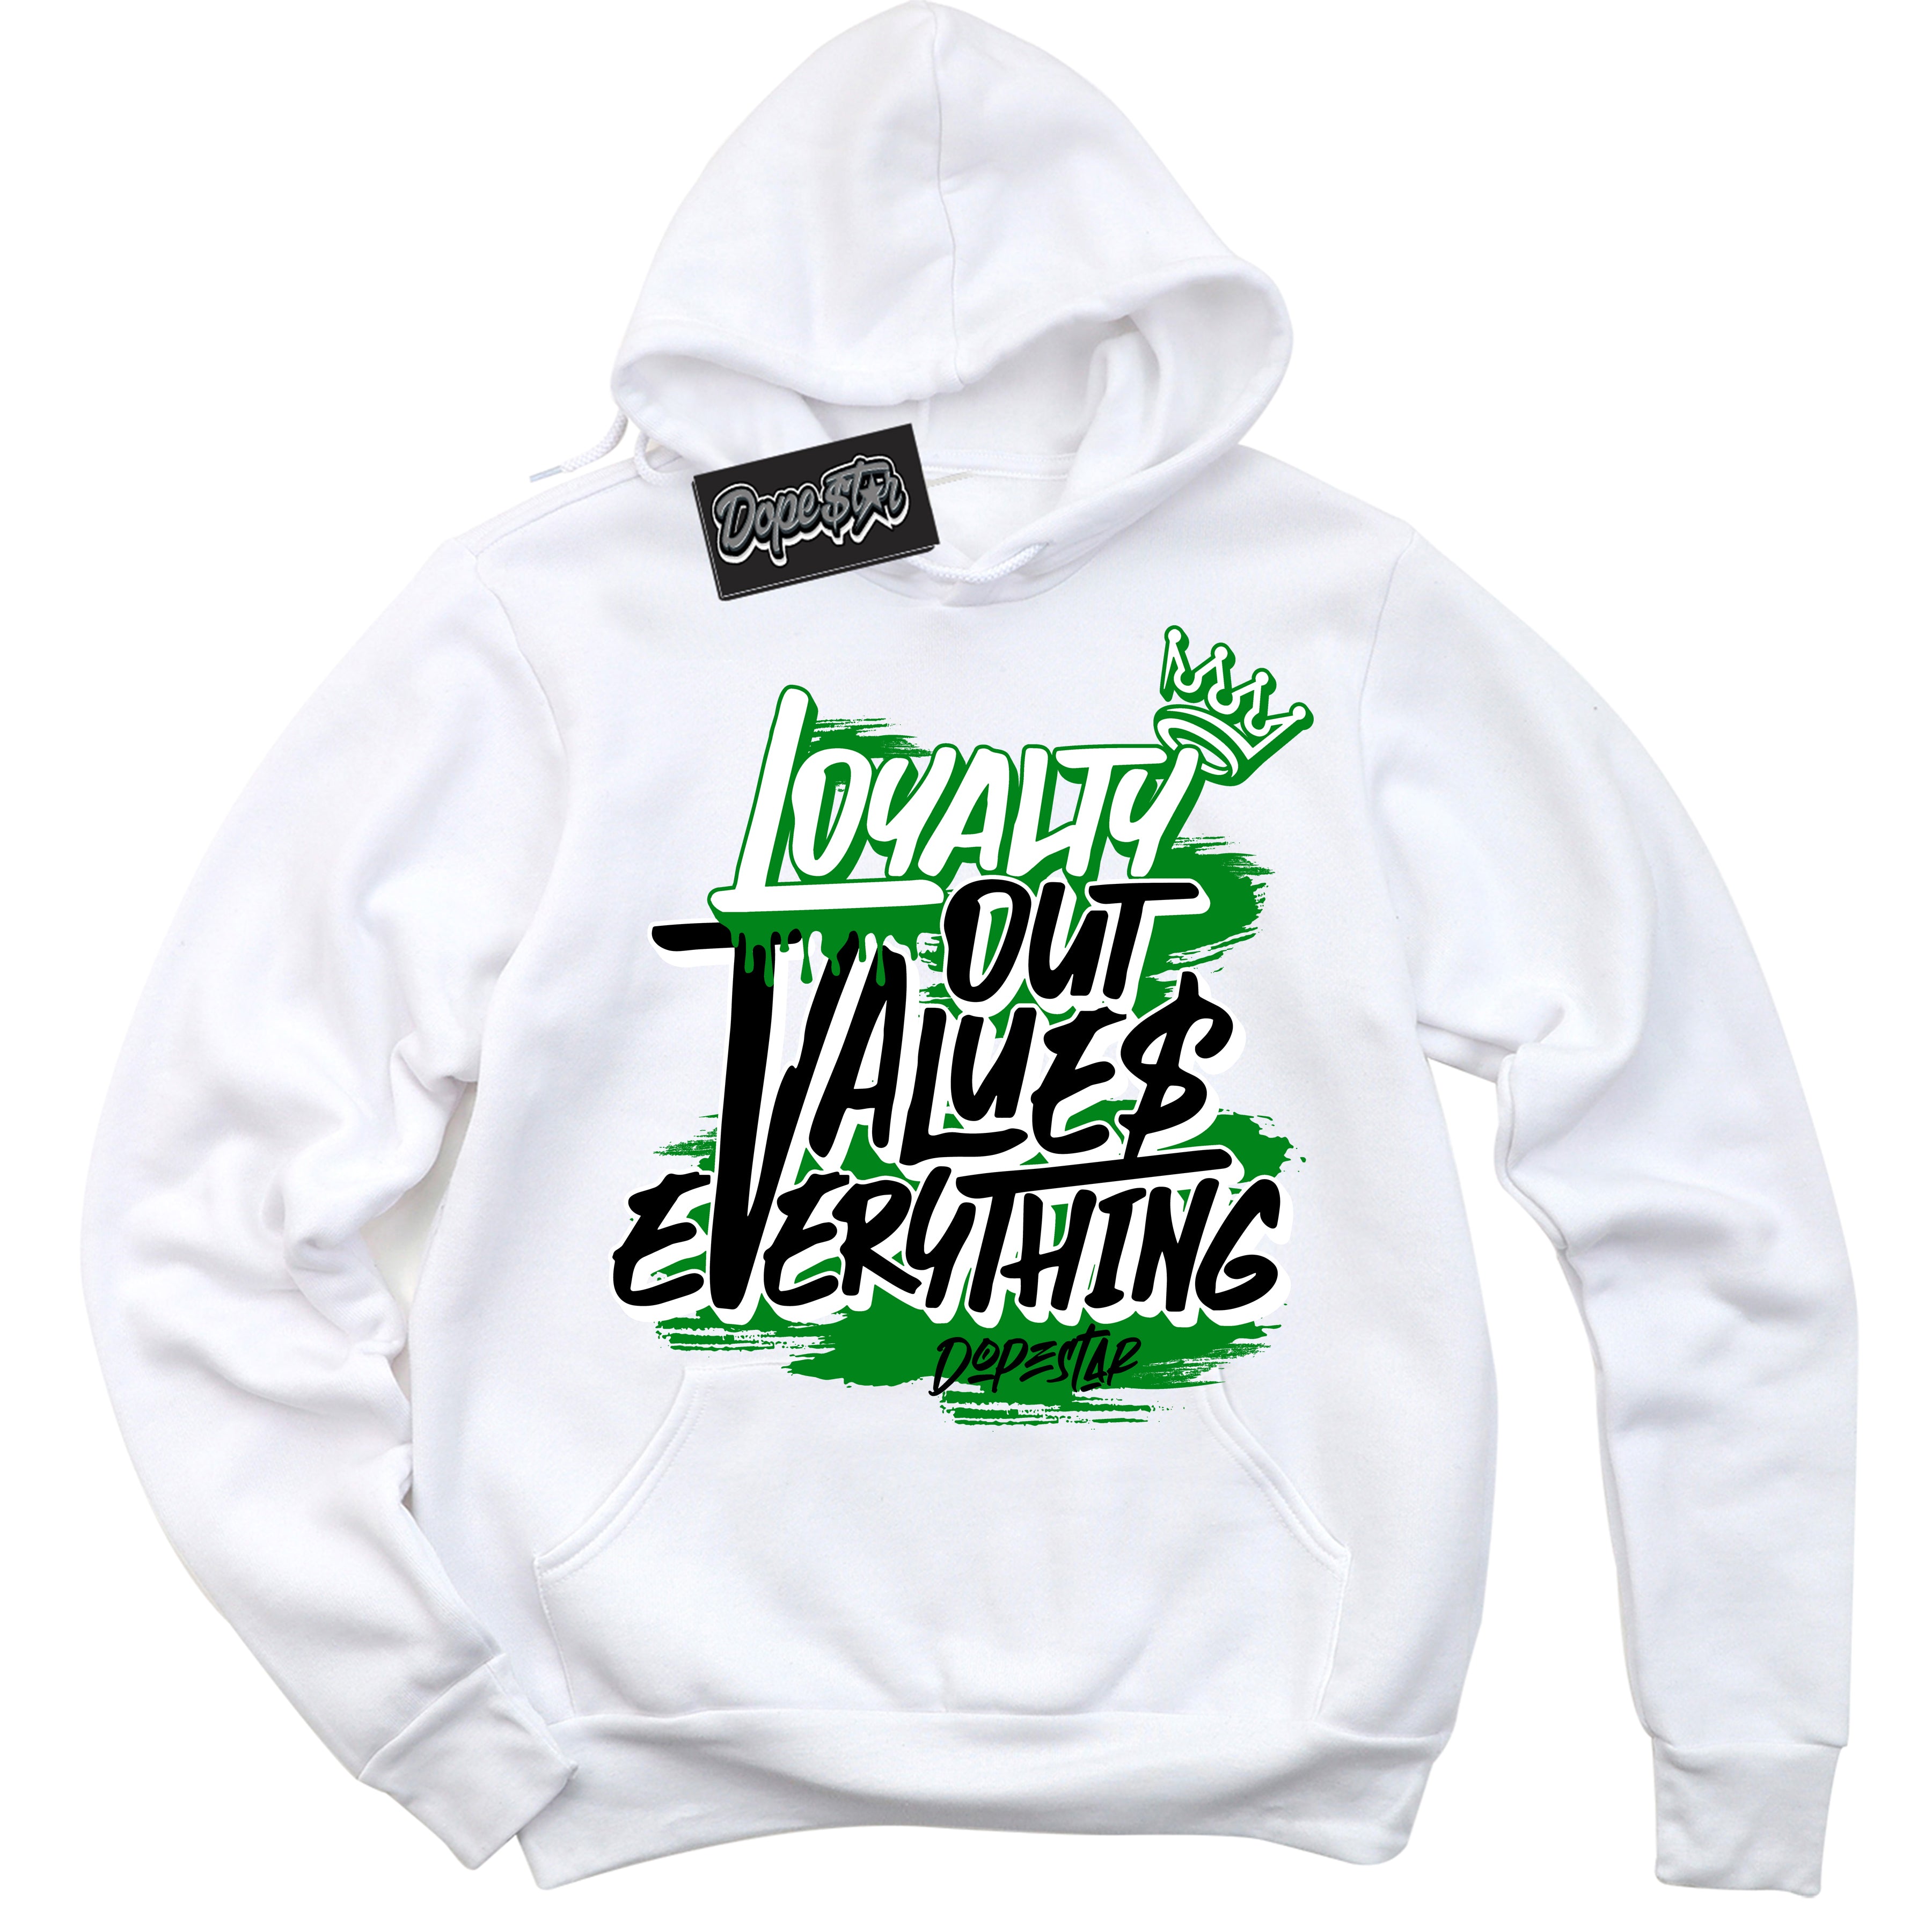 Cool White Hoodie with “ Loyalty Out Values Everything ”  design that Perfectly Matches OG Lucky Green 1s Sneakers.